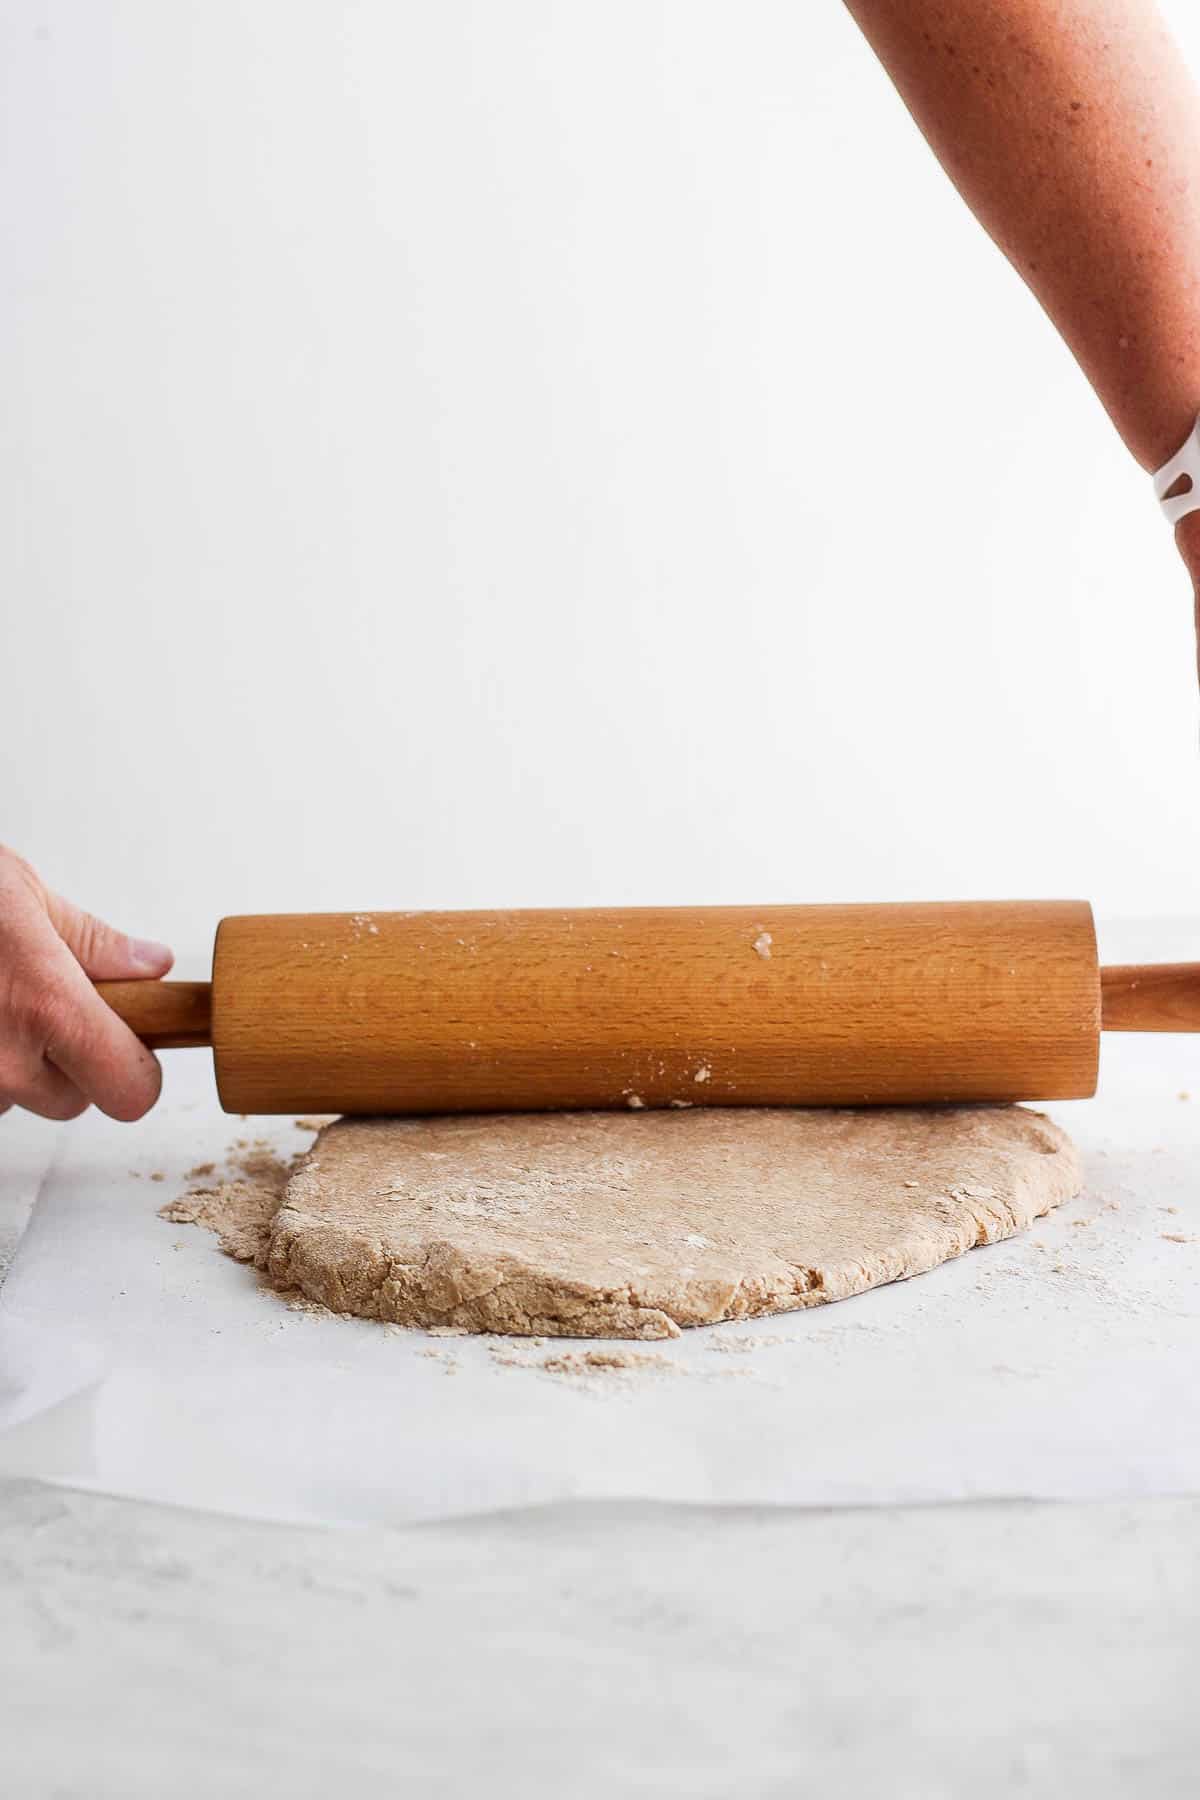 Shortcake dough being rolled out with a rolling pin.